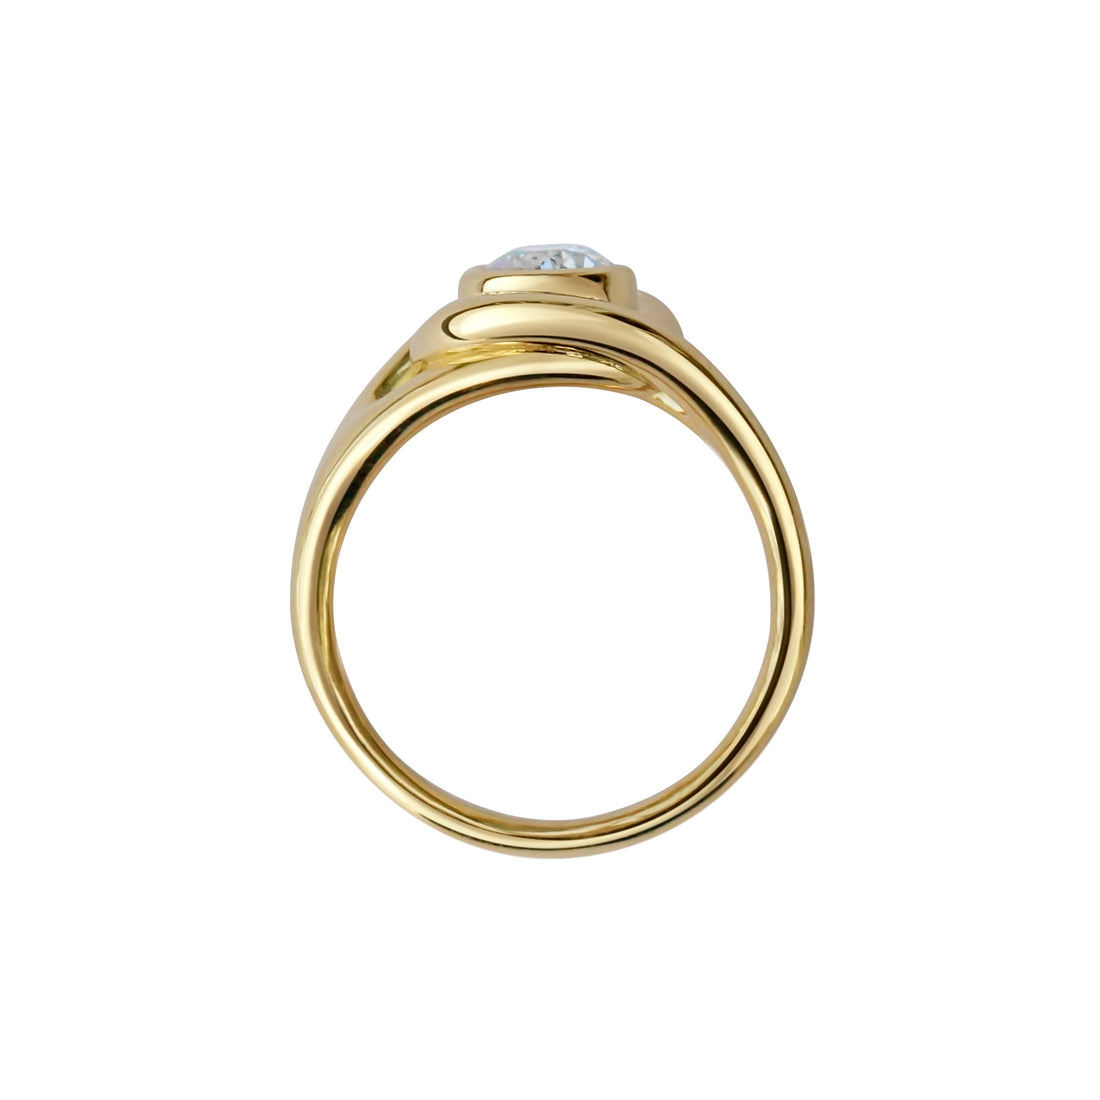 Gold and Diamond Iona Ring by Gee Woods | The Cut London